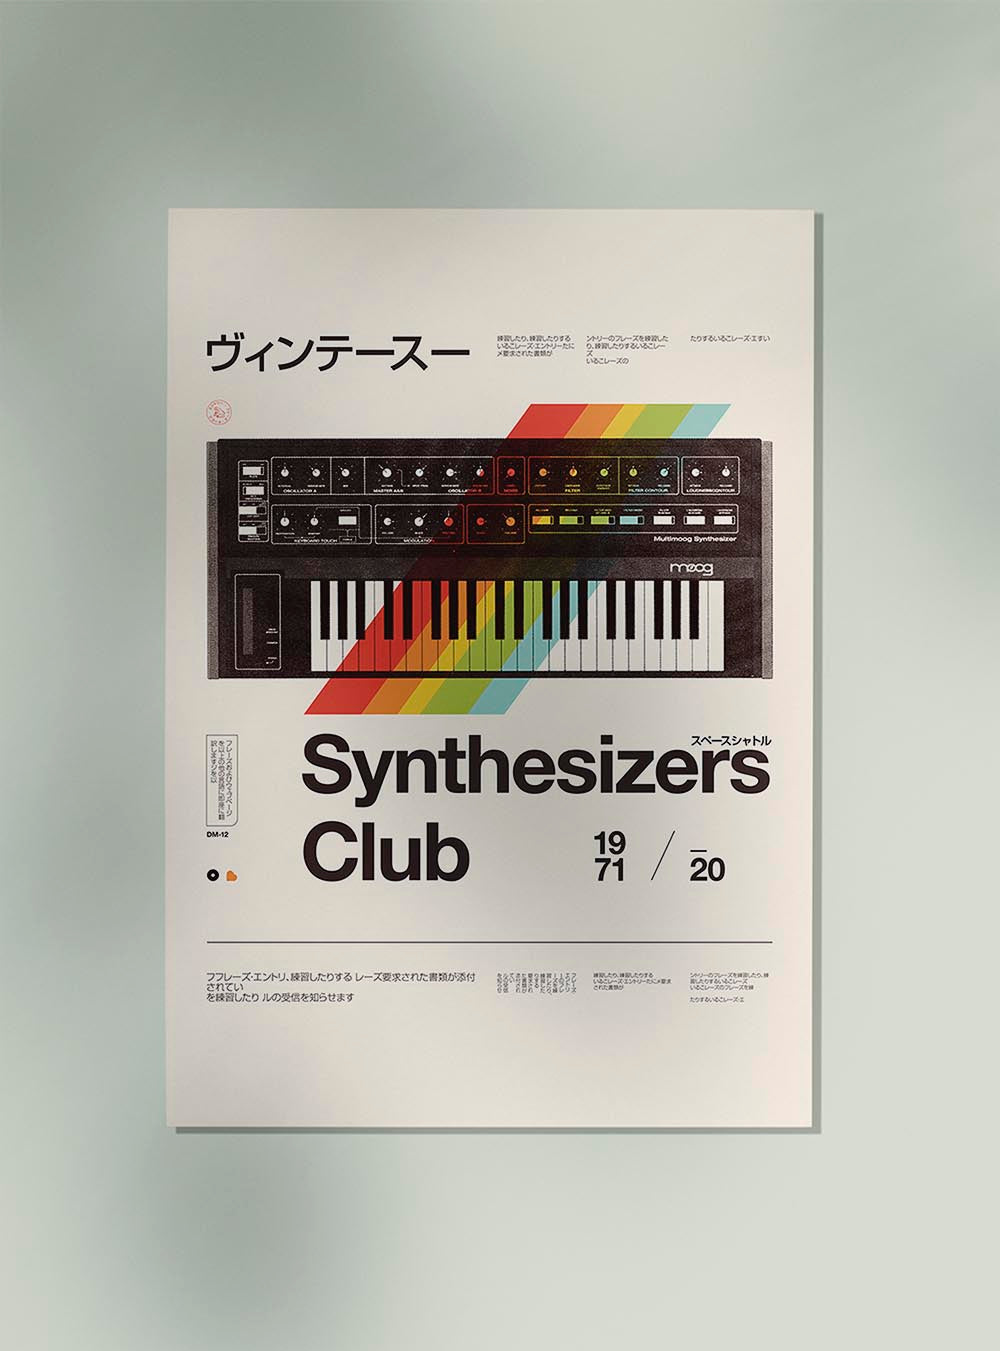 Synthetisers Club by Florent Bodart